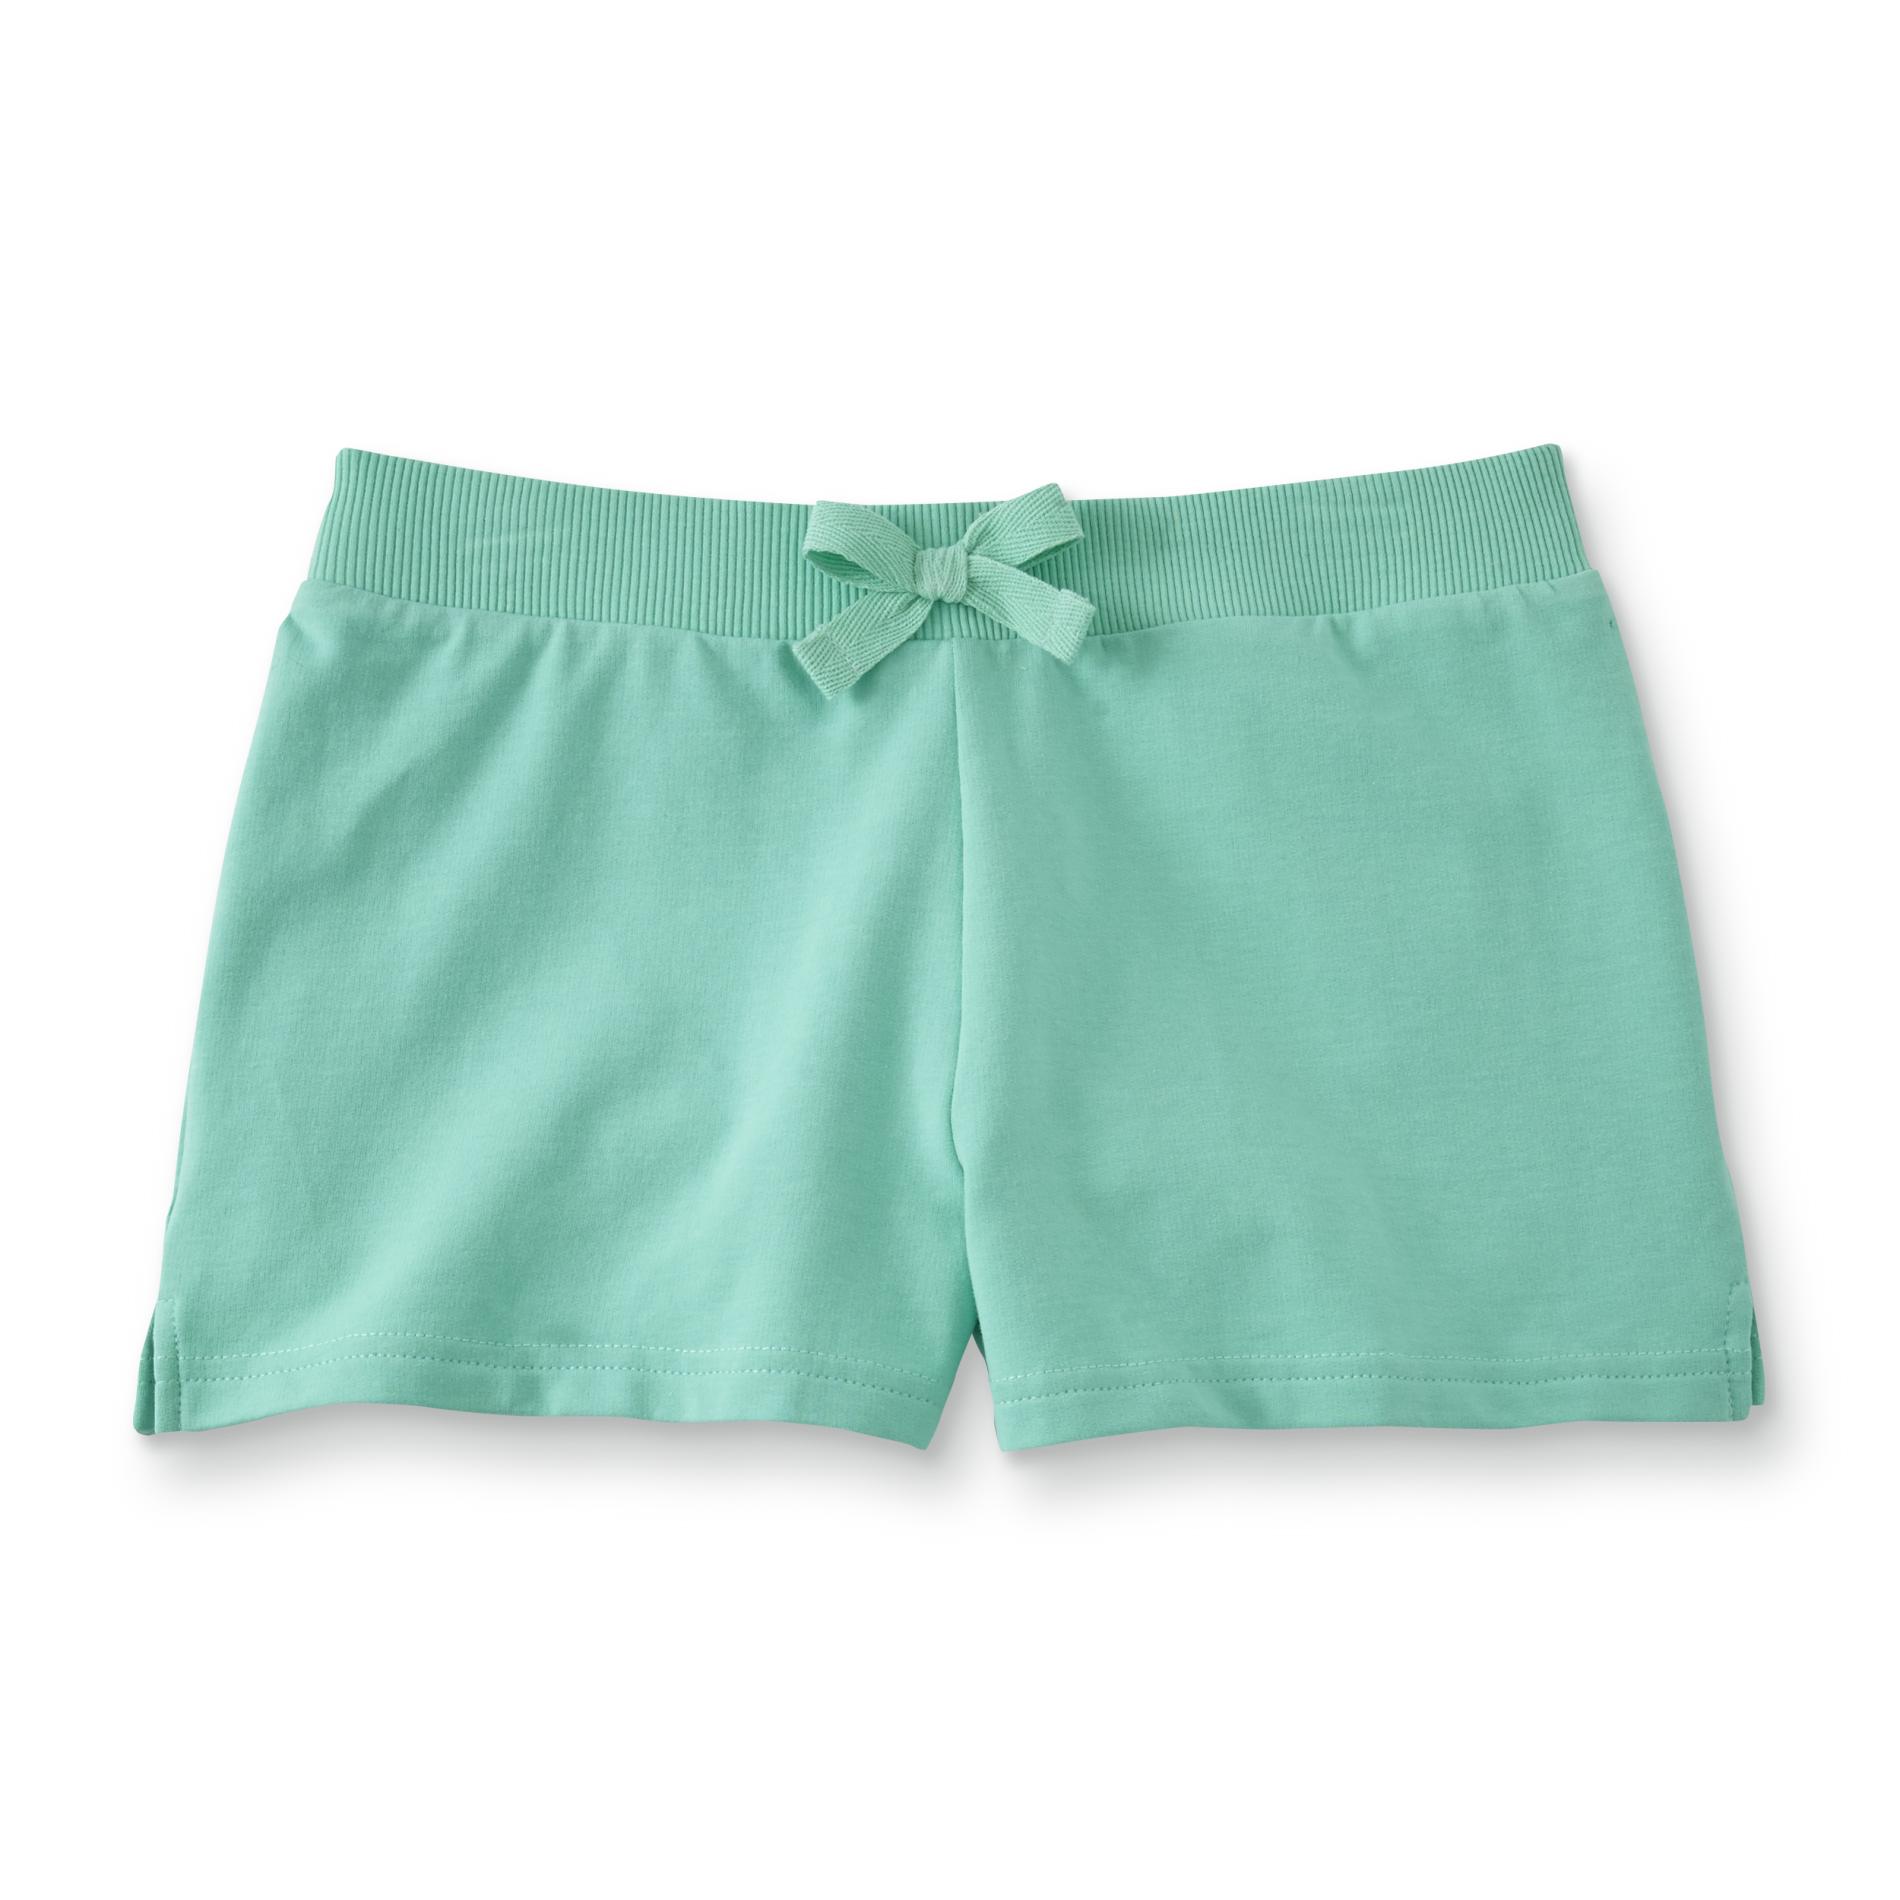 Simply Styled Girls' French Terry Shorts